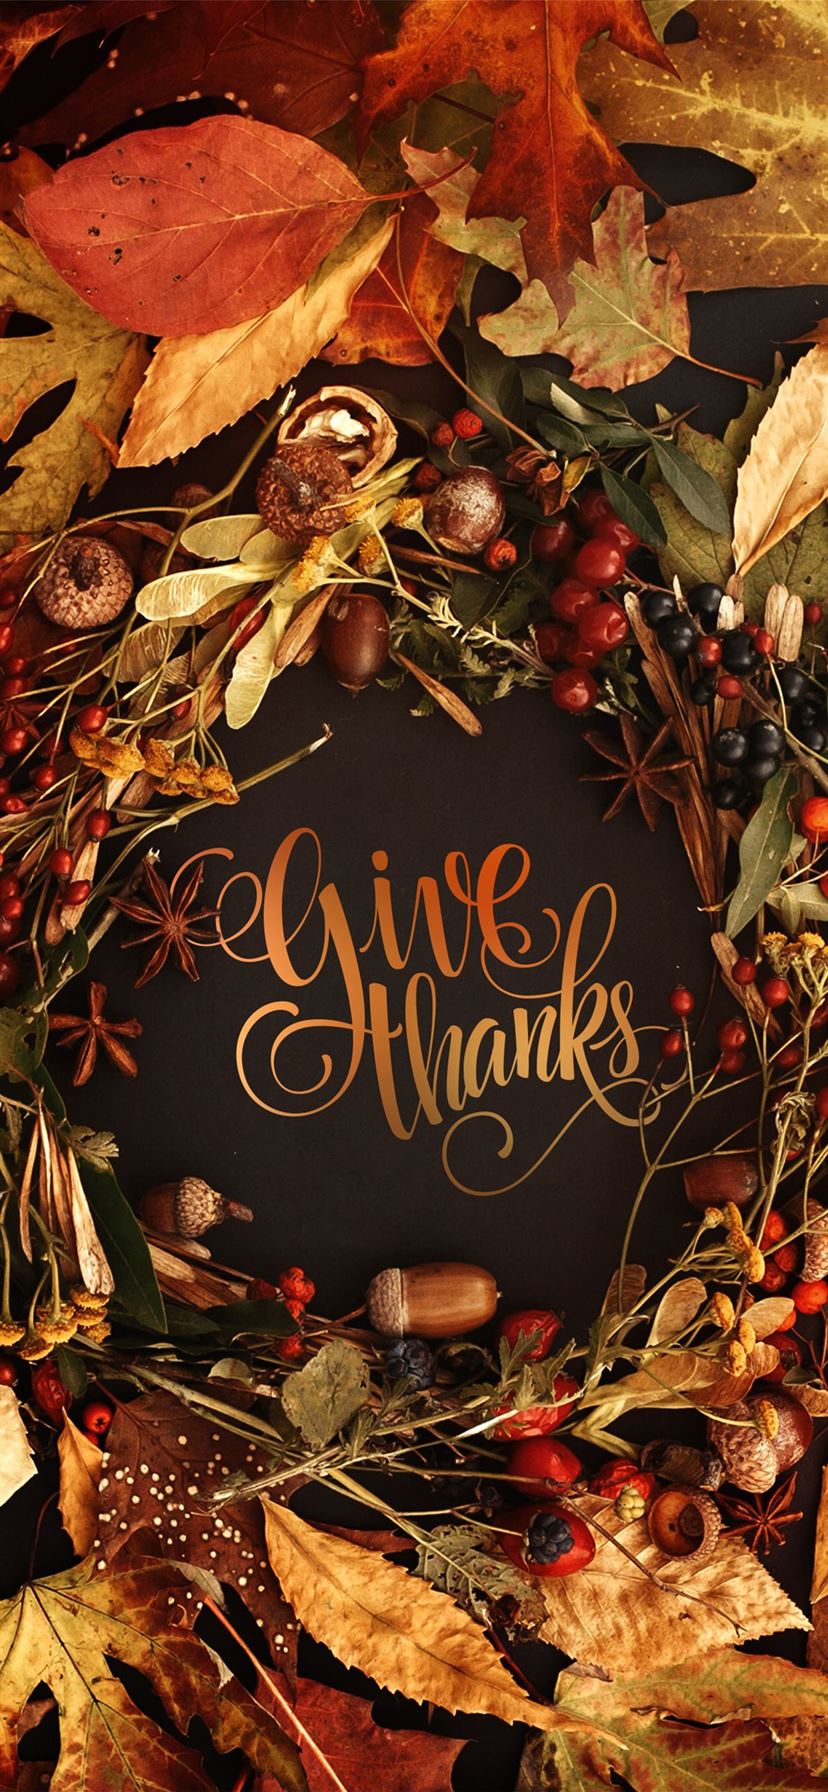 200+] Thanksgiving Wallpapers | Wallpapers.com